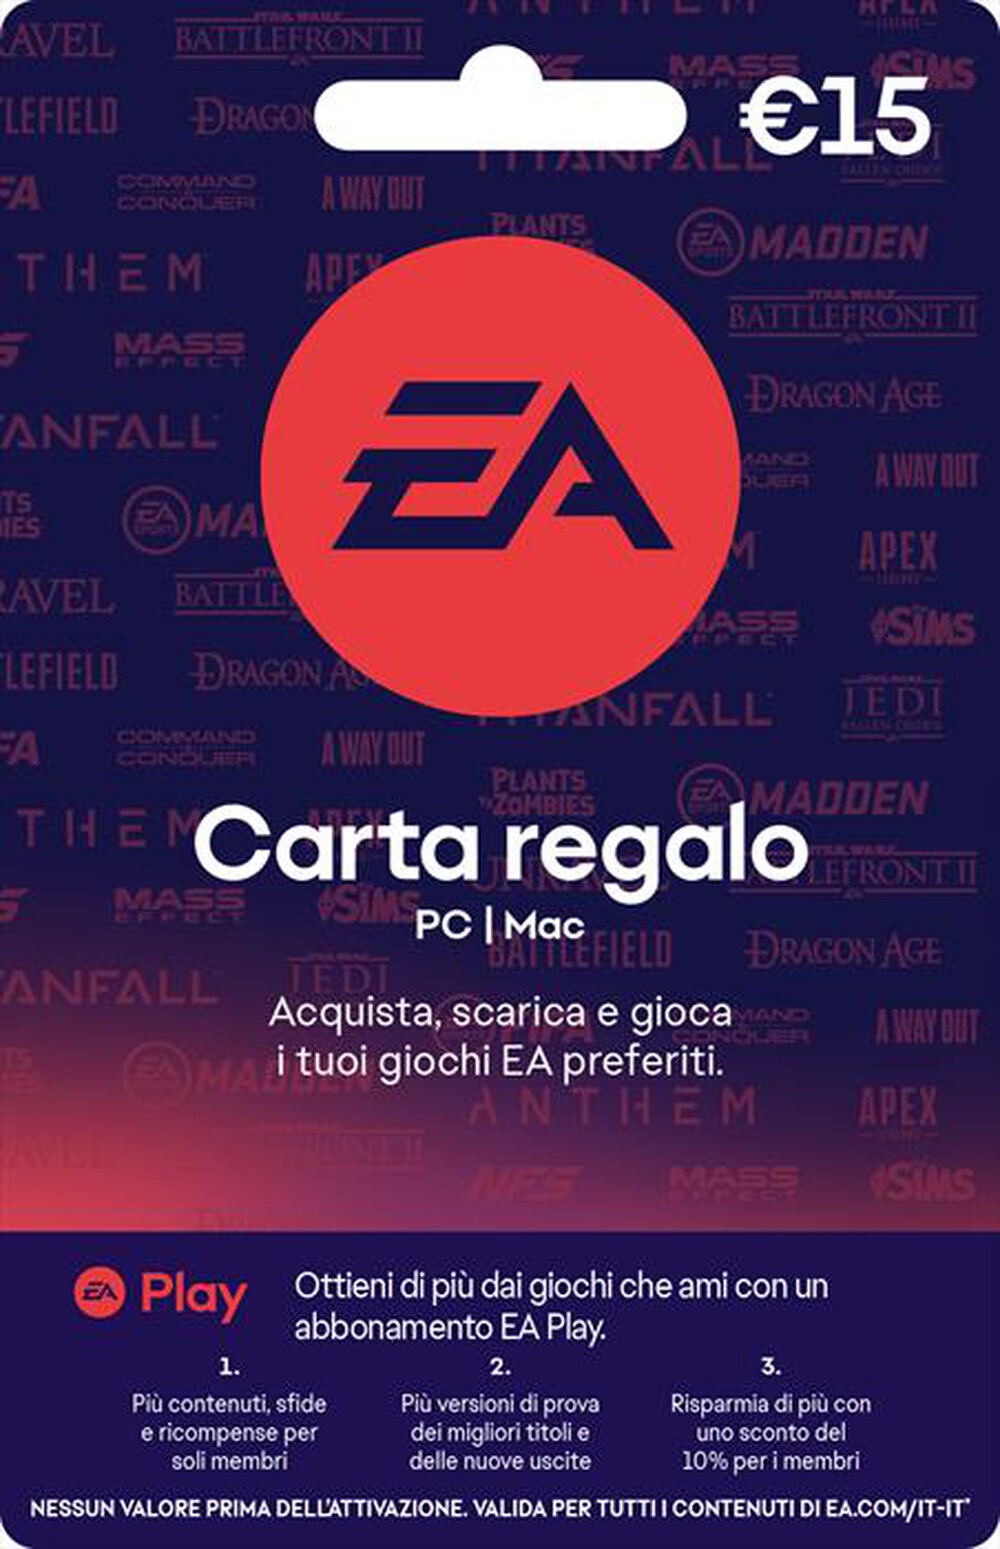 "ELECTRONIC ARTS - Gift Card 15 EUR - "